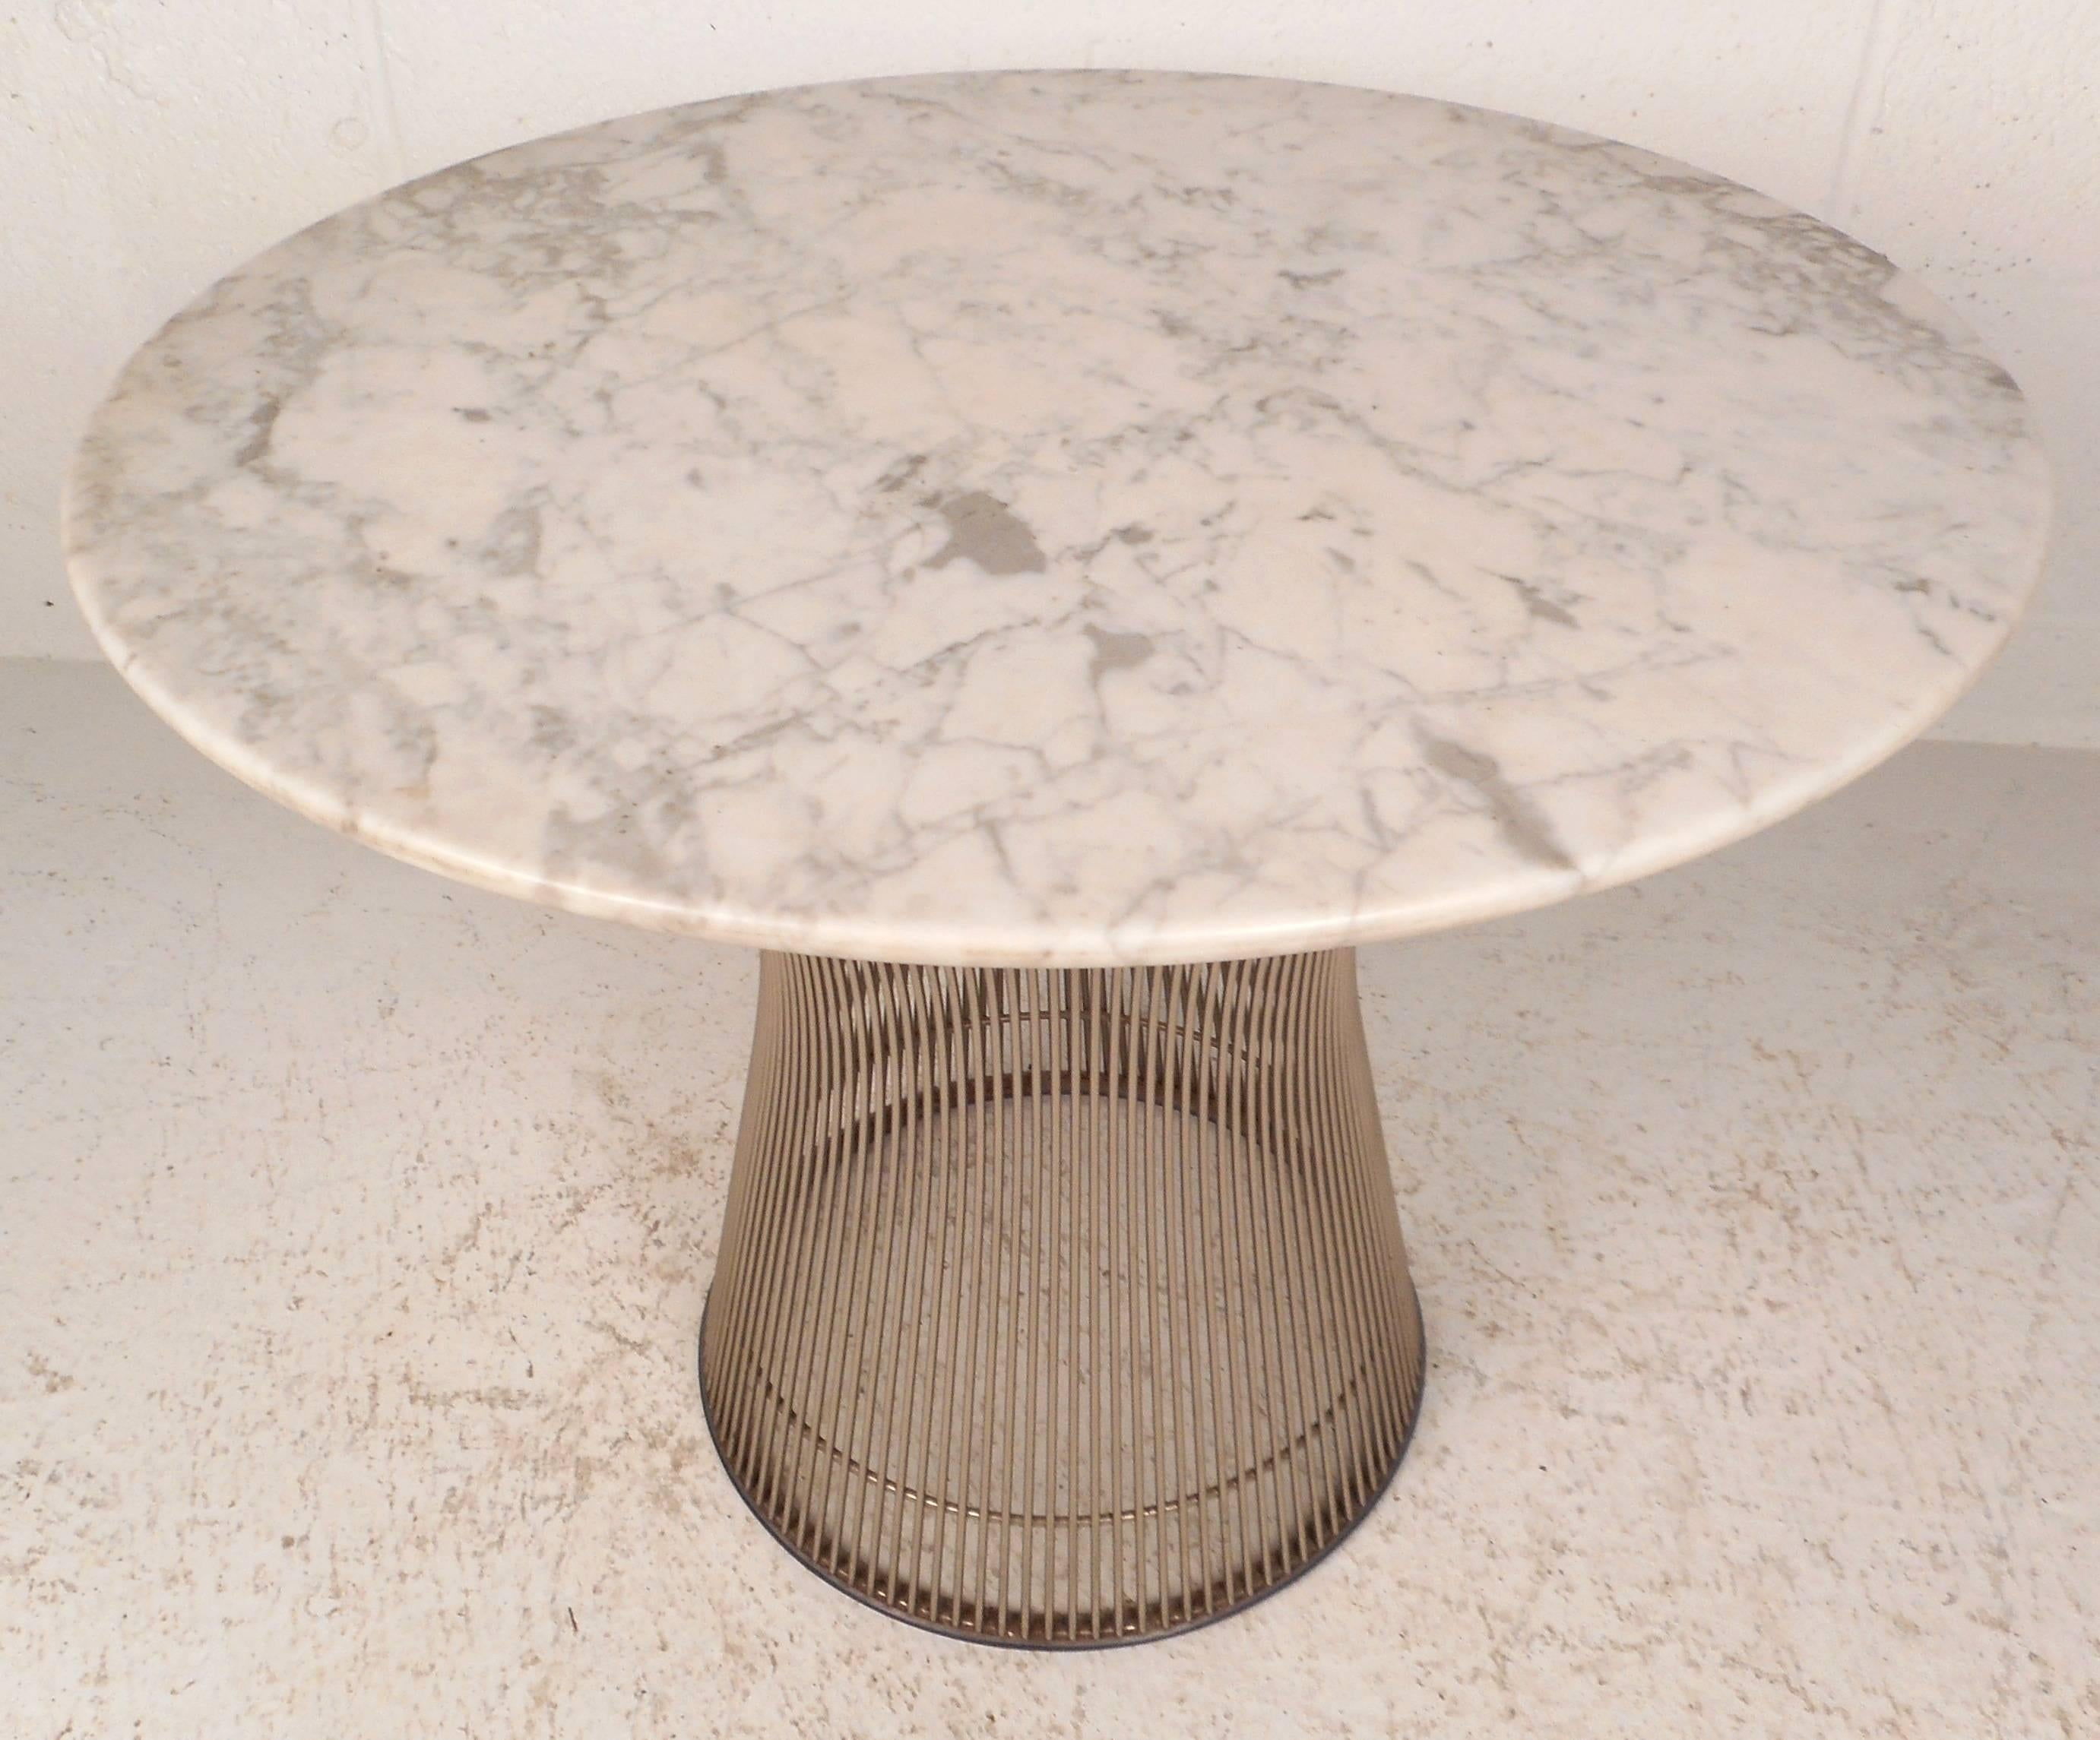 Wonderful vintage modern side table features a thick round marble-top and a sculptural wired chrome base. The sleek design offers sturdiness and style in any modern interior. Perfect addition to any home, business, or office. Please confirm item